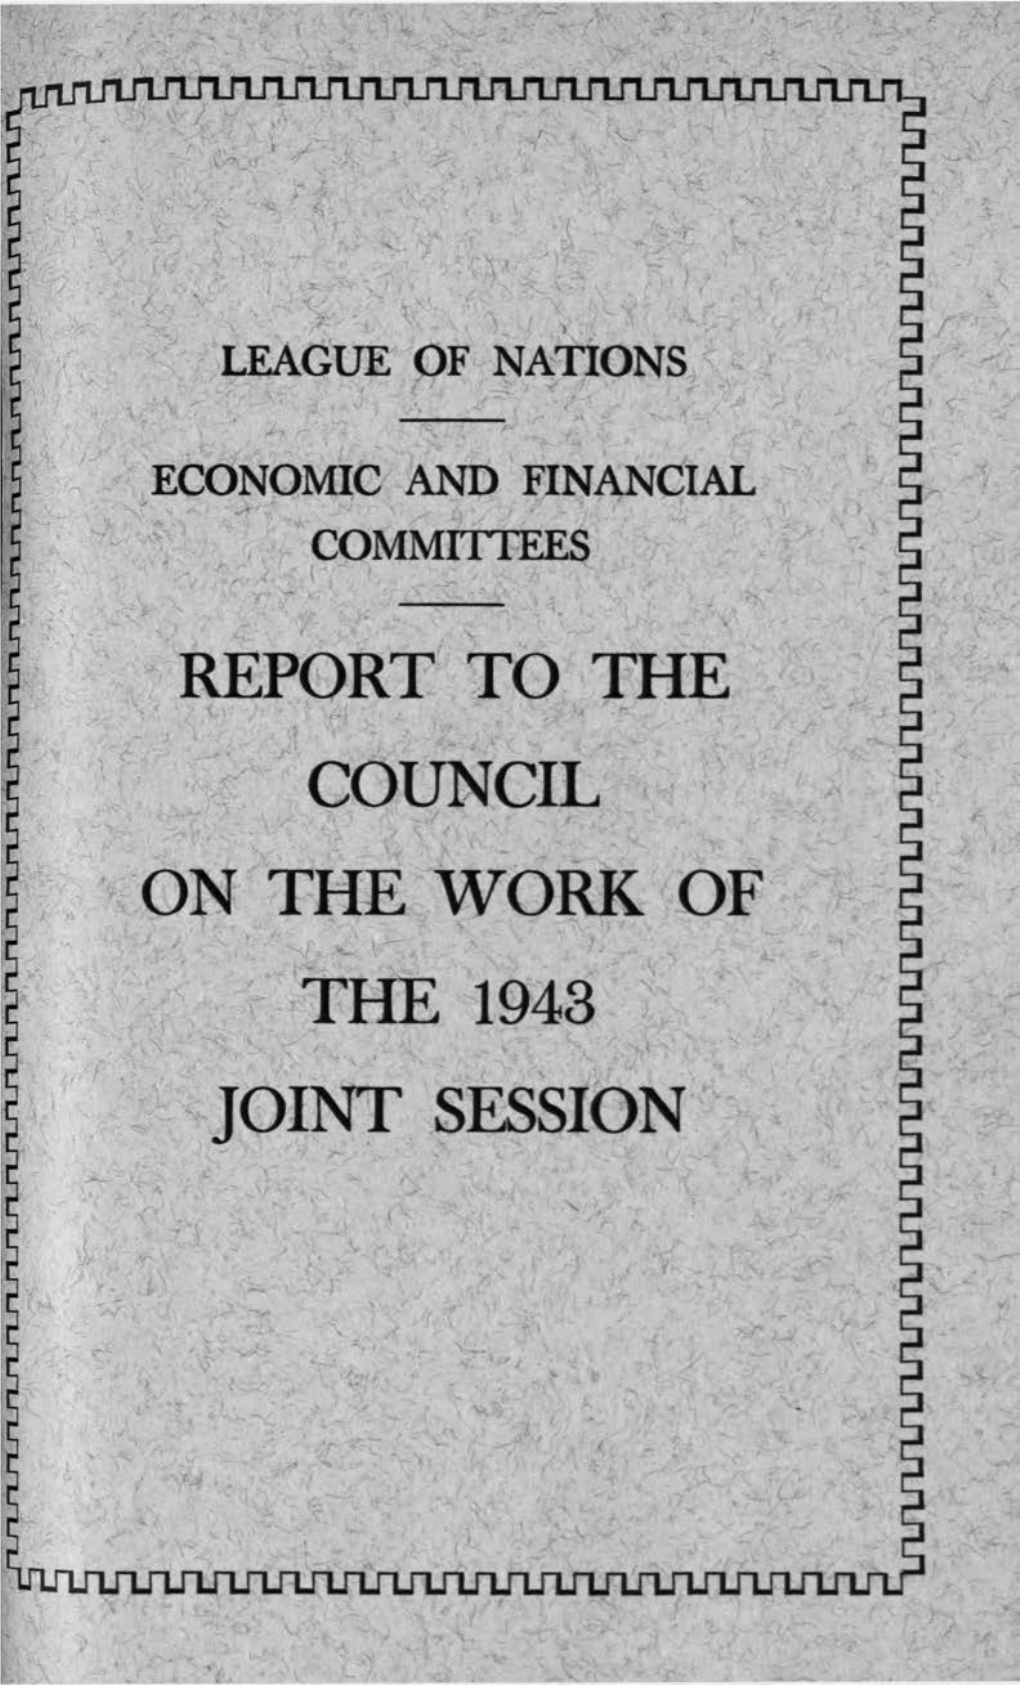 REPORT to 'FHE COUNCIL on the WORK of TPIE 1943 Jojnr SESSION COMMUNICATED to the COUNCIL AND